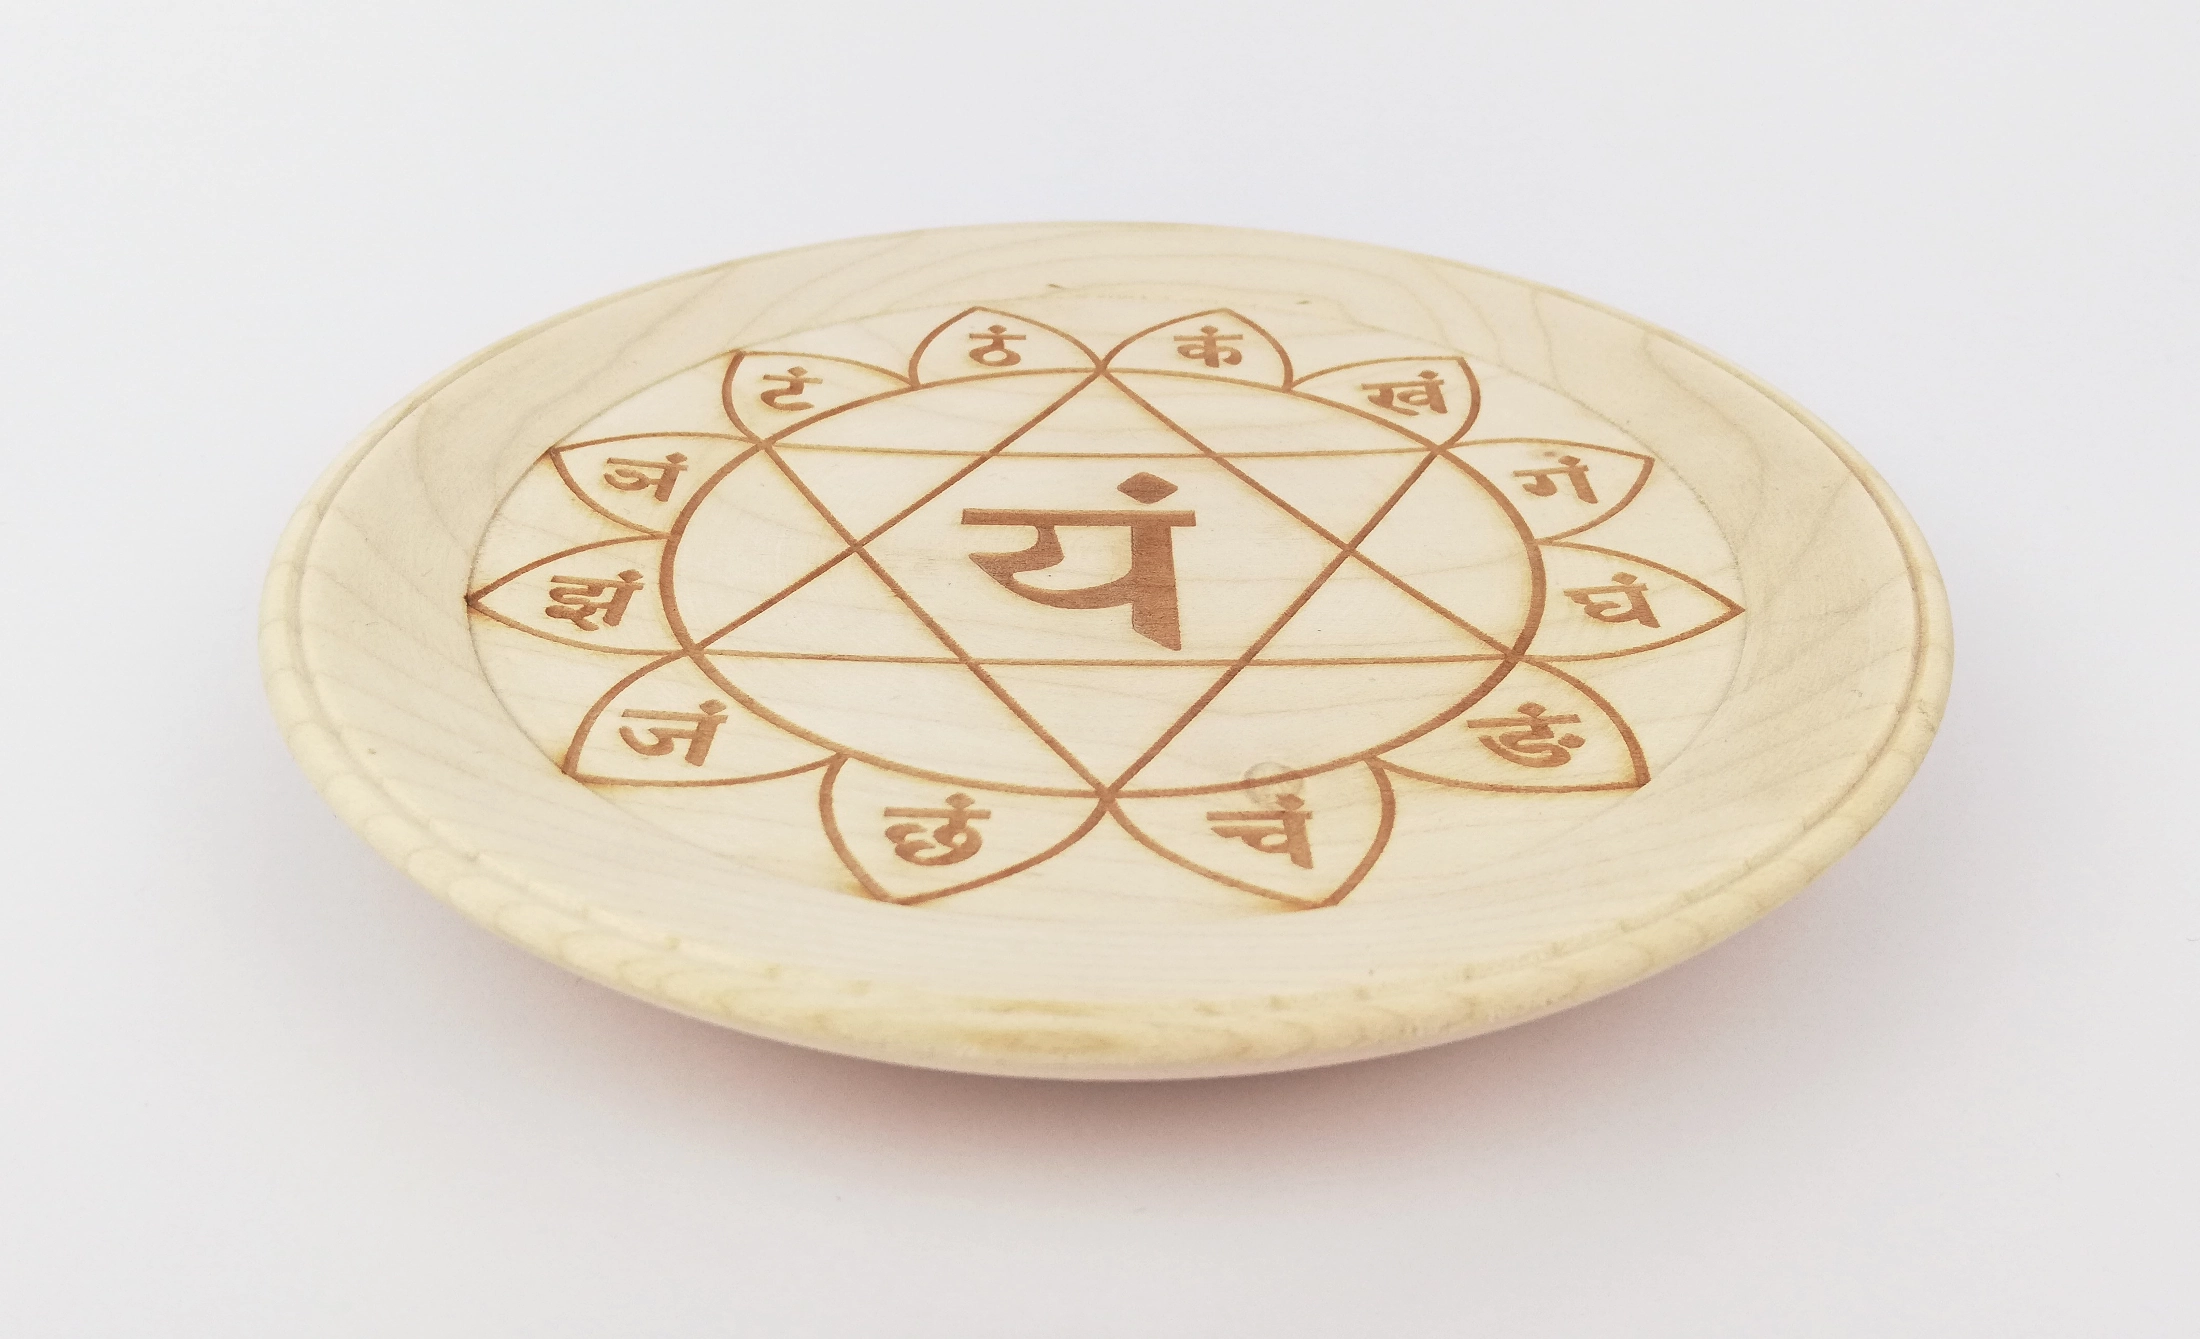 Heart chakra on a small plate (16cm/6.3in in diameter), side.